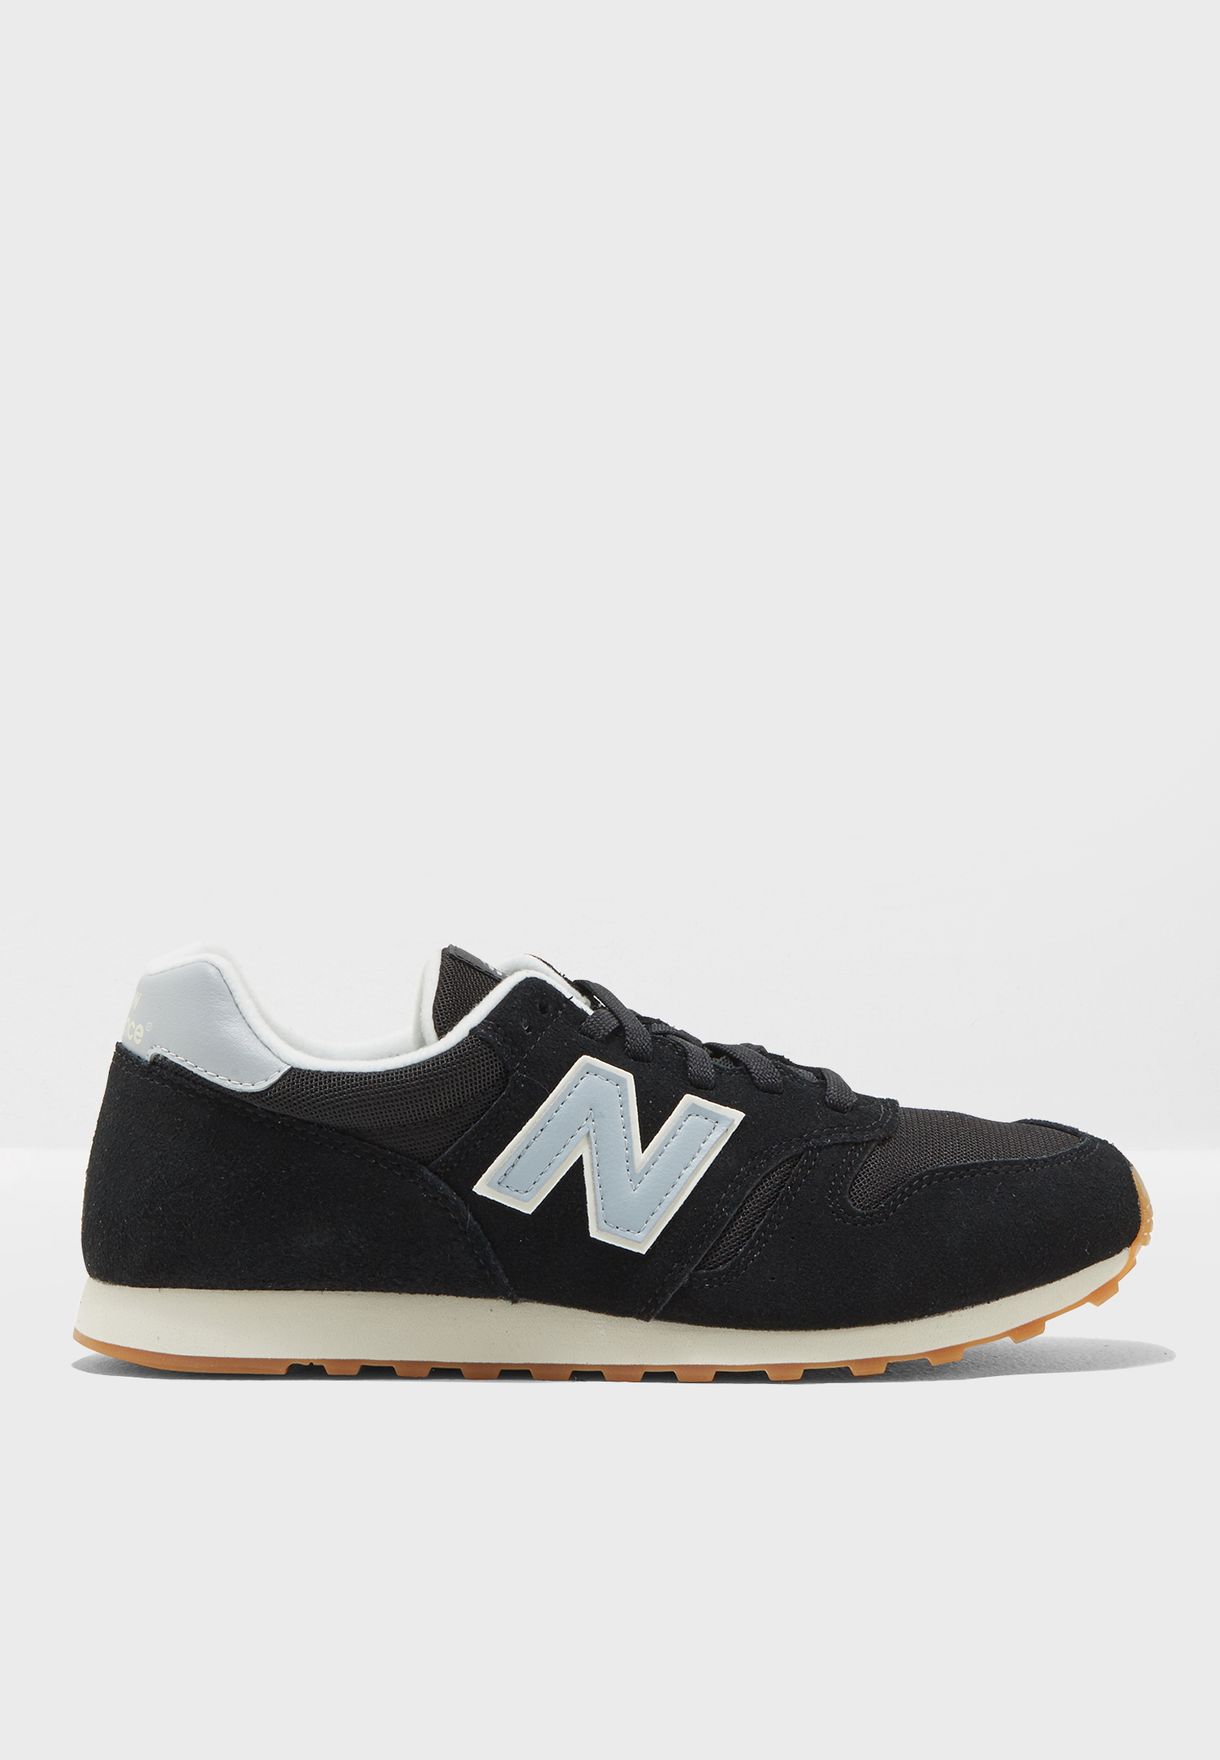 new balance black & grey 373 v1 suede trainers